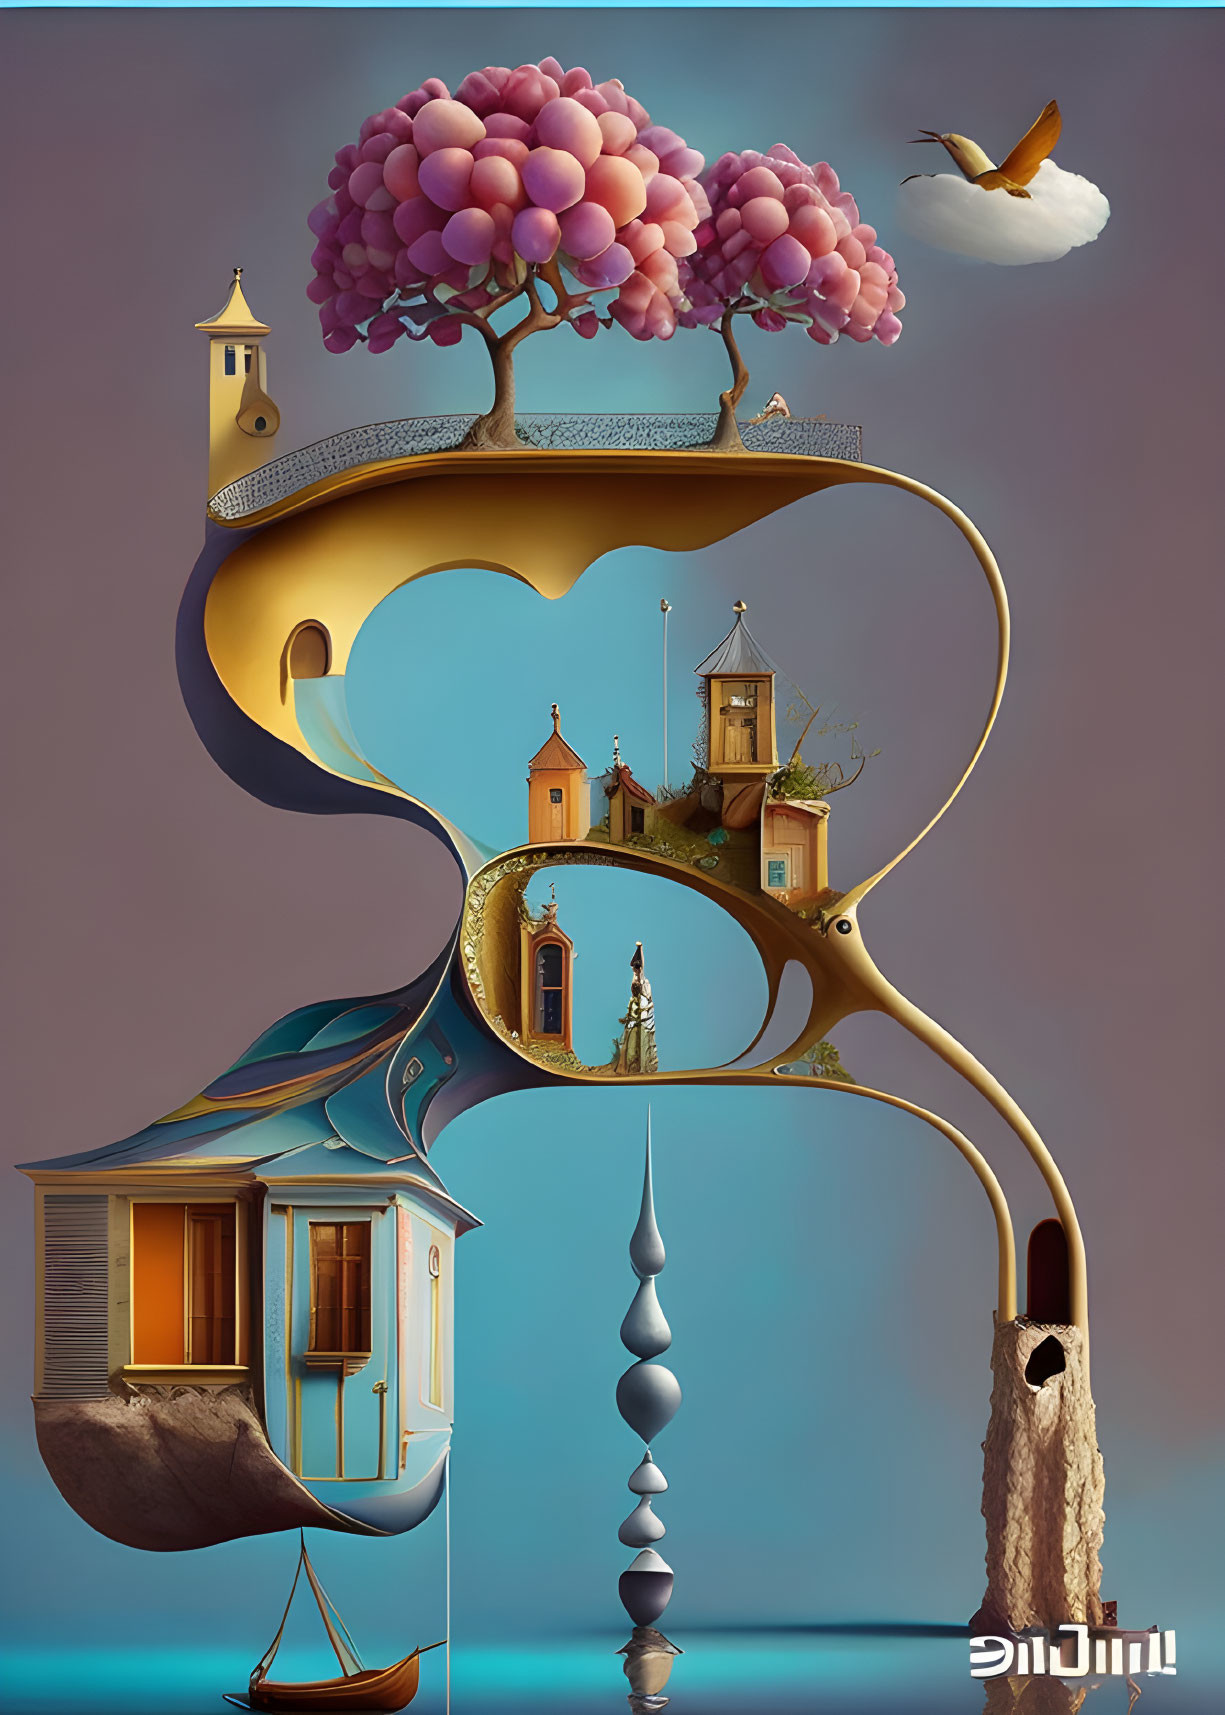 Surreal floating terraced landscapes with houses, trees, and a bird in irregular loops on blue